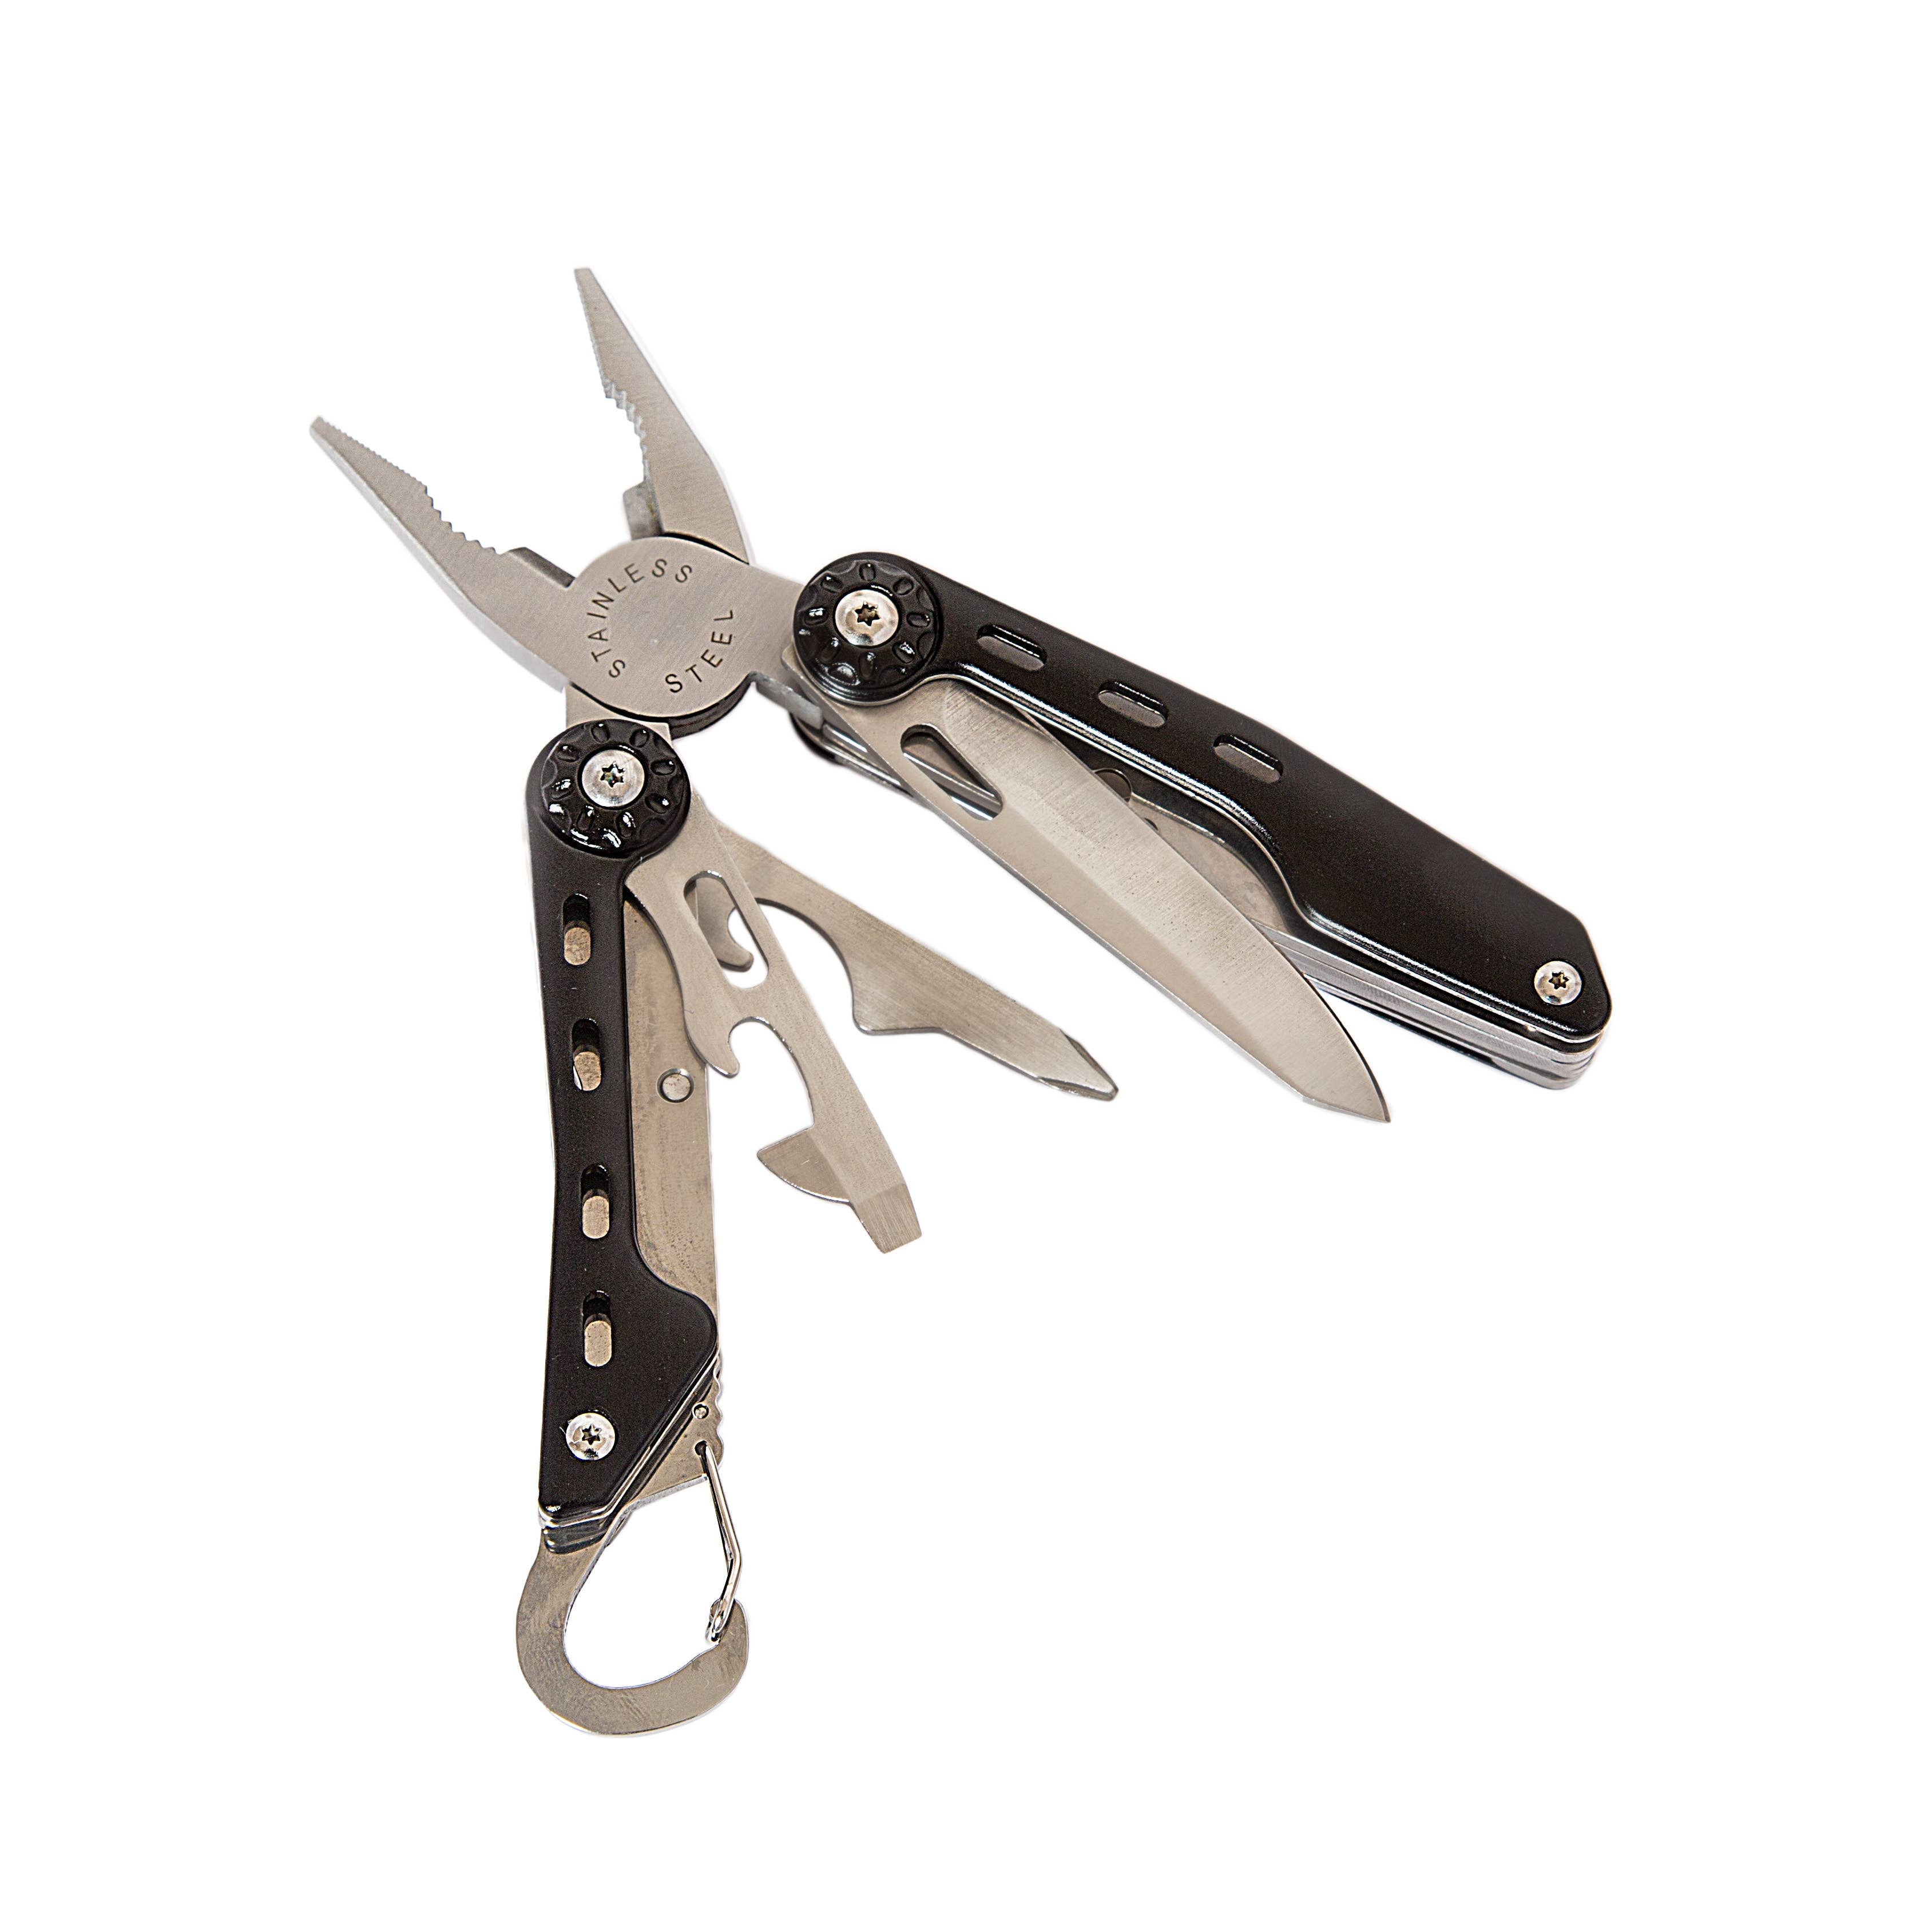 Brouk and Co. - The Multi-Function Carabiner Tool